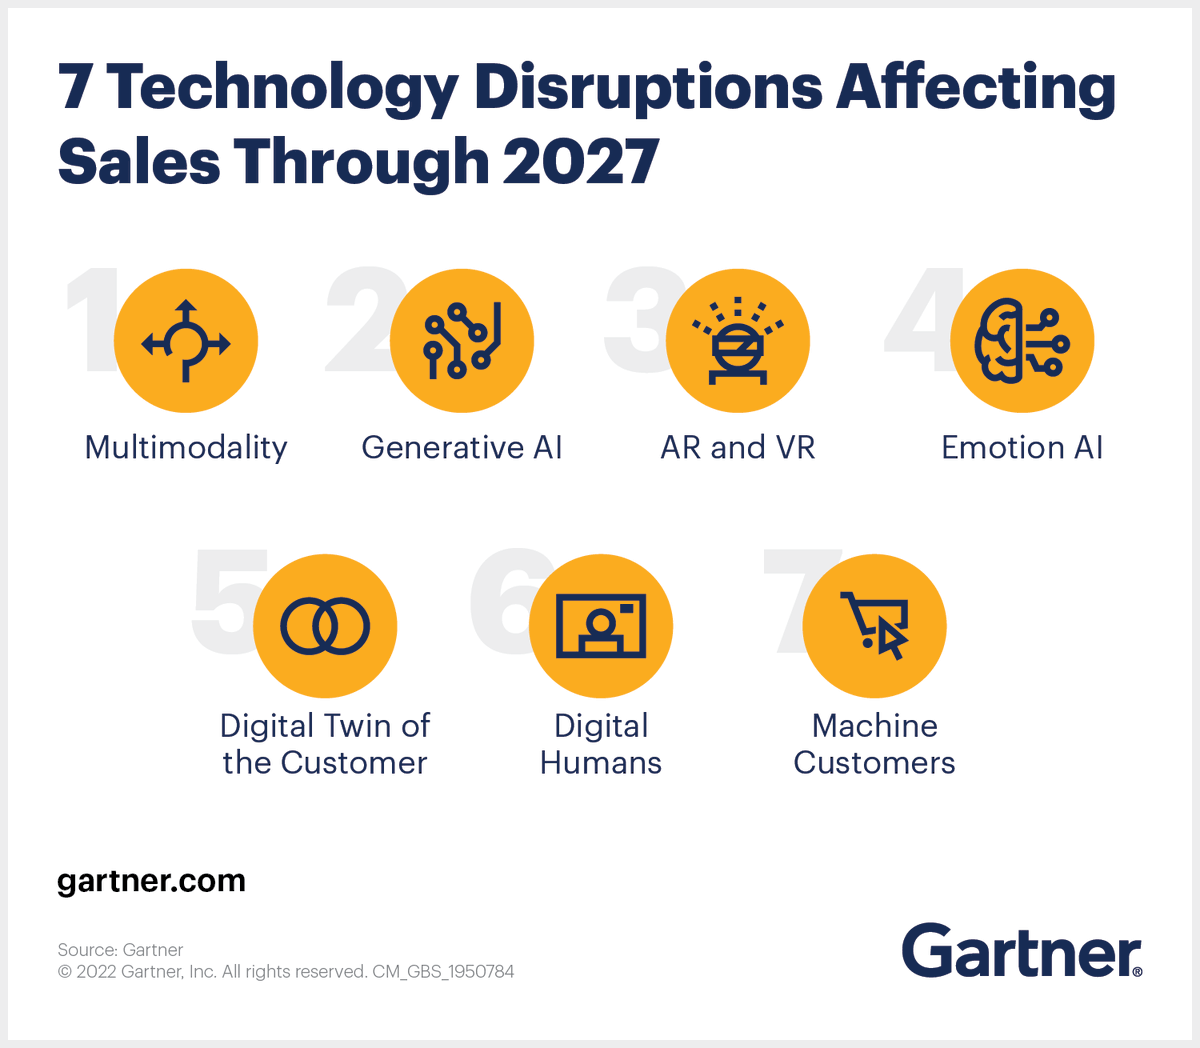 By 2026, 50% of B2B buyers will interact with a digital human in a buying cycle. Here's more on the 7 technology disruptions that will completely change sales: gtnr.it/3JtQlOI #GartnerSales #SalesTech